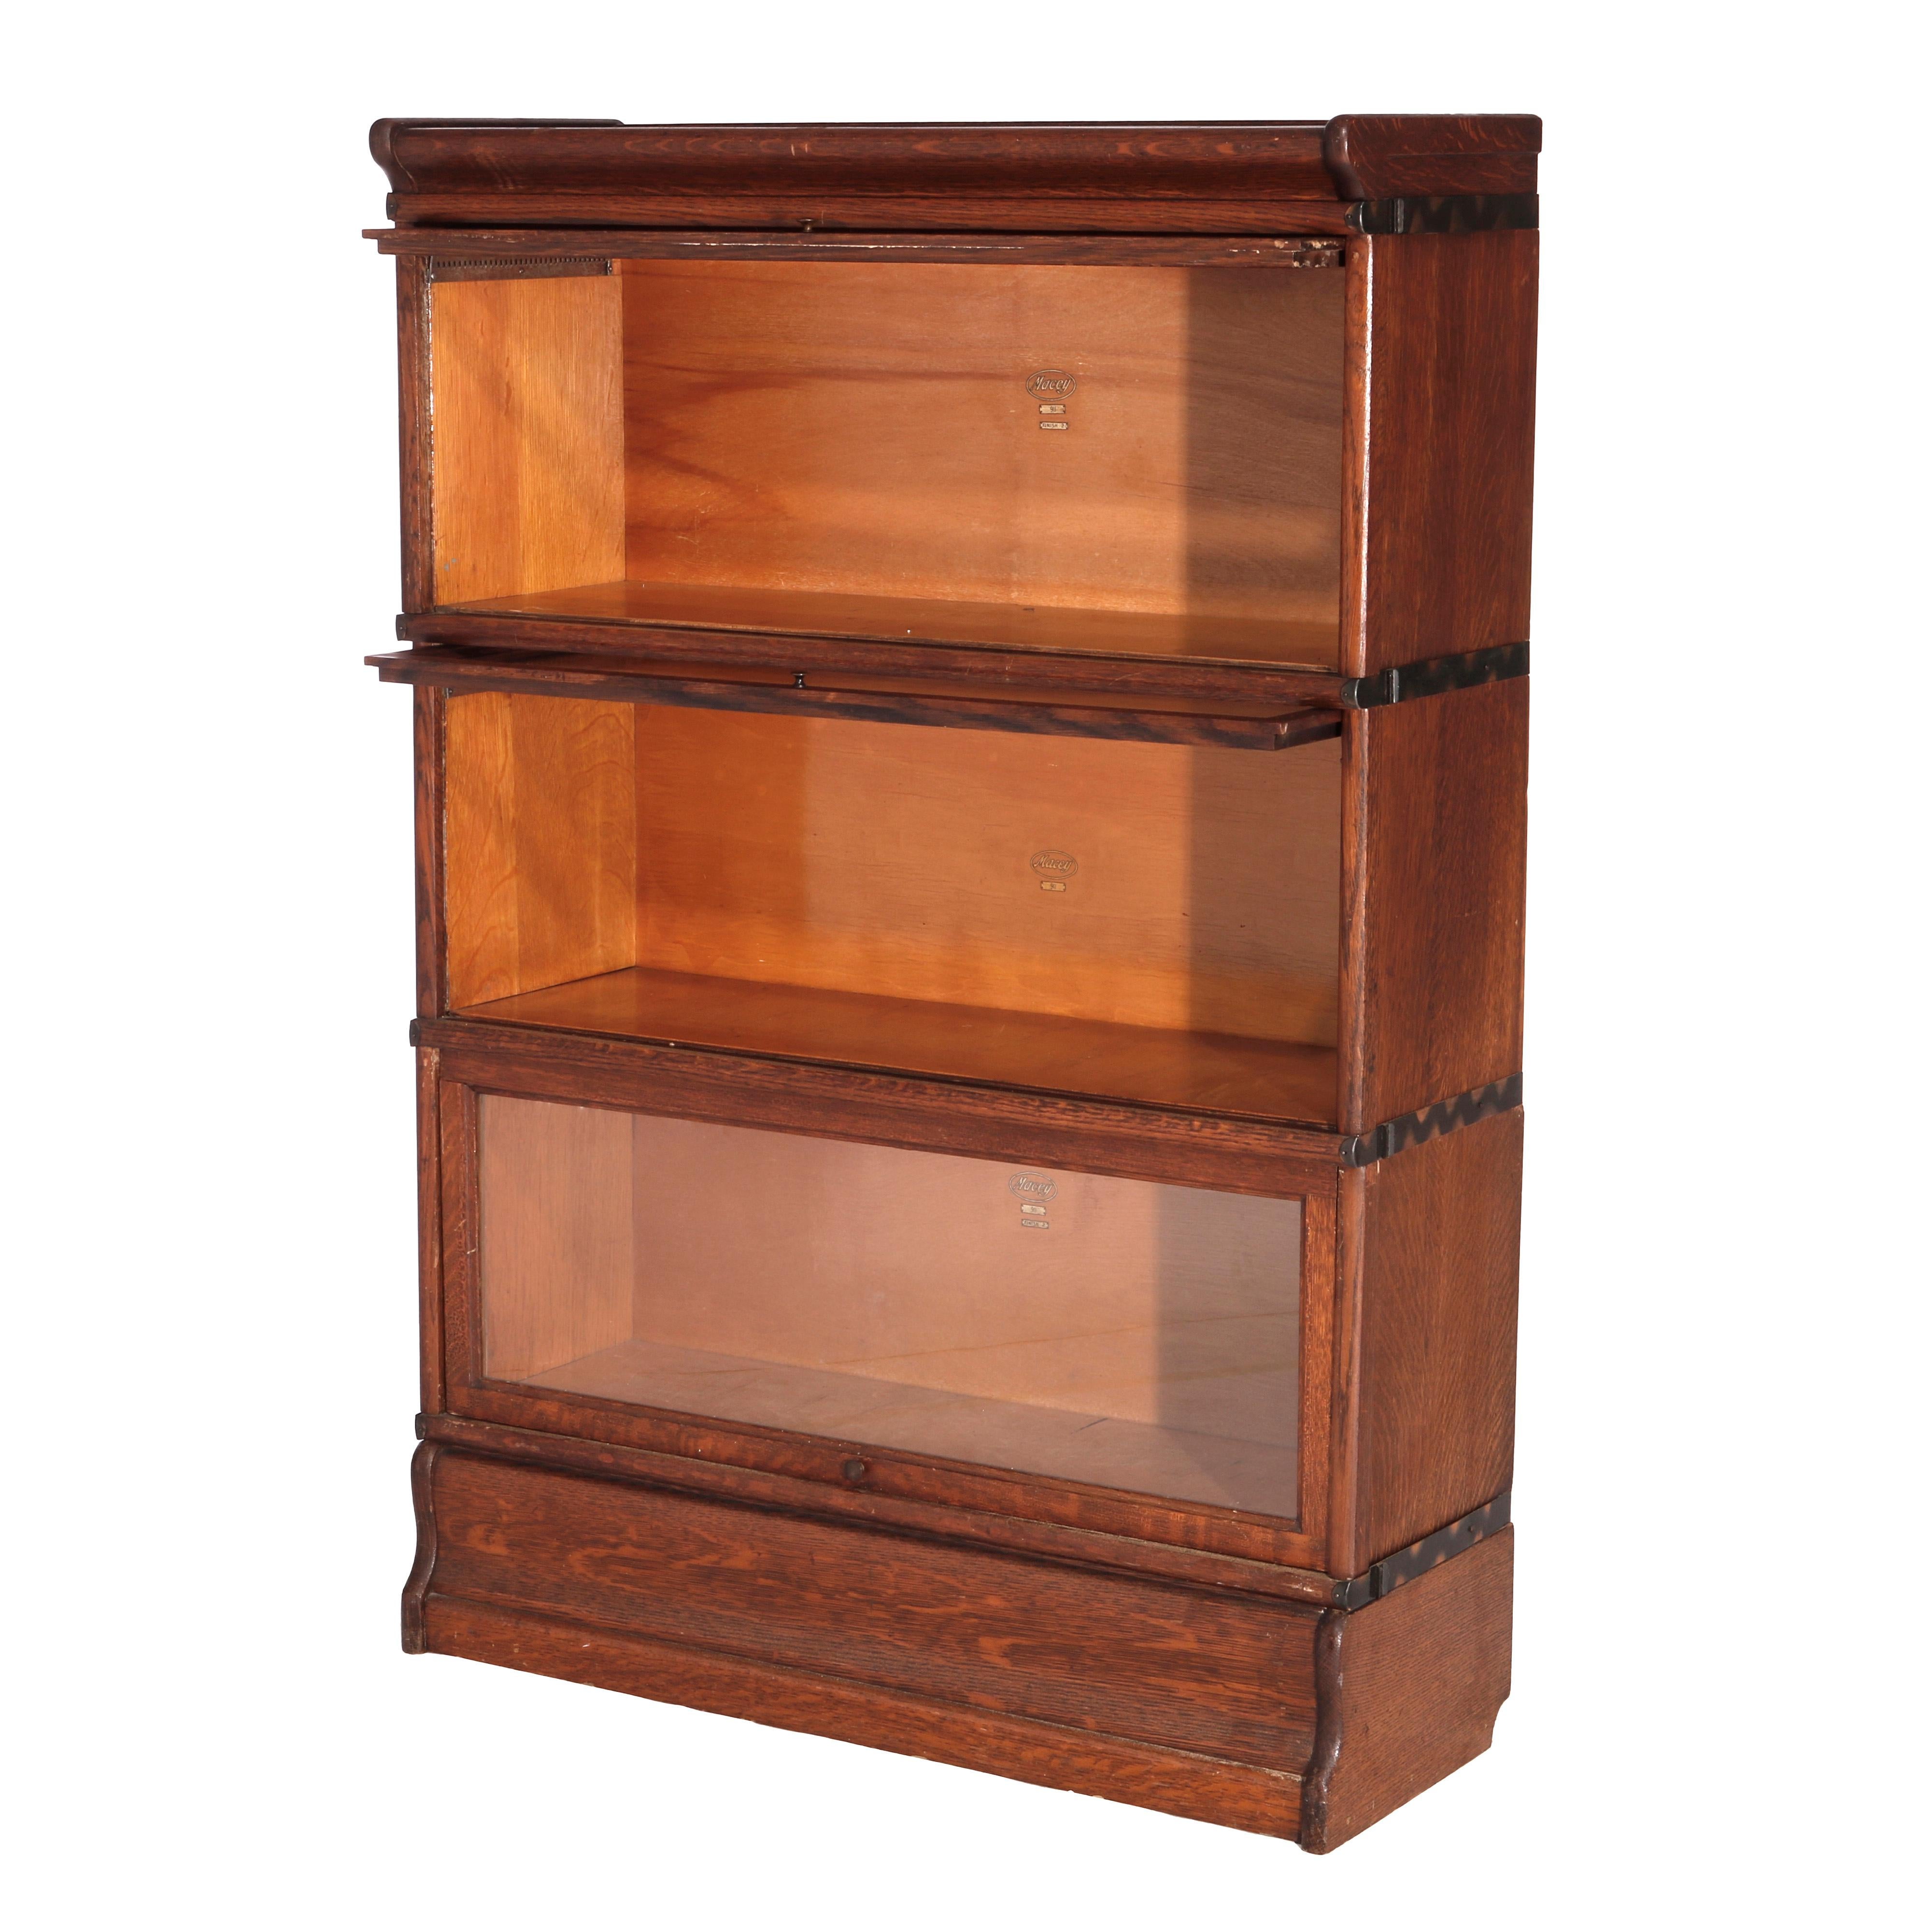 An antique Arts & Crafts Mission barrister bookcase by Macey offers oak construction with three stacks, each having pull out glass doors, raised on an ogee base, maker label as photographed, c1910

Measures - 49.5